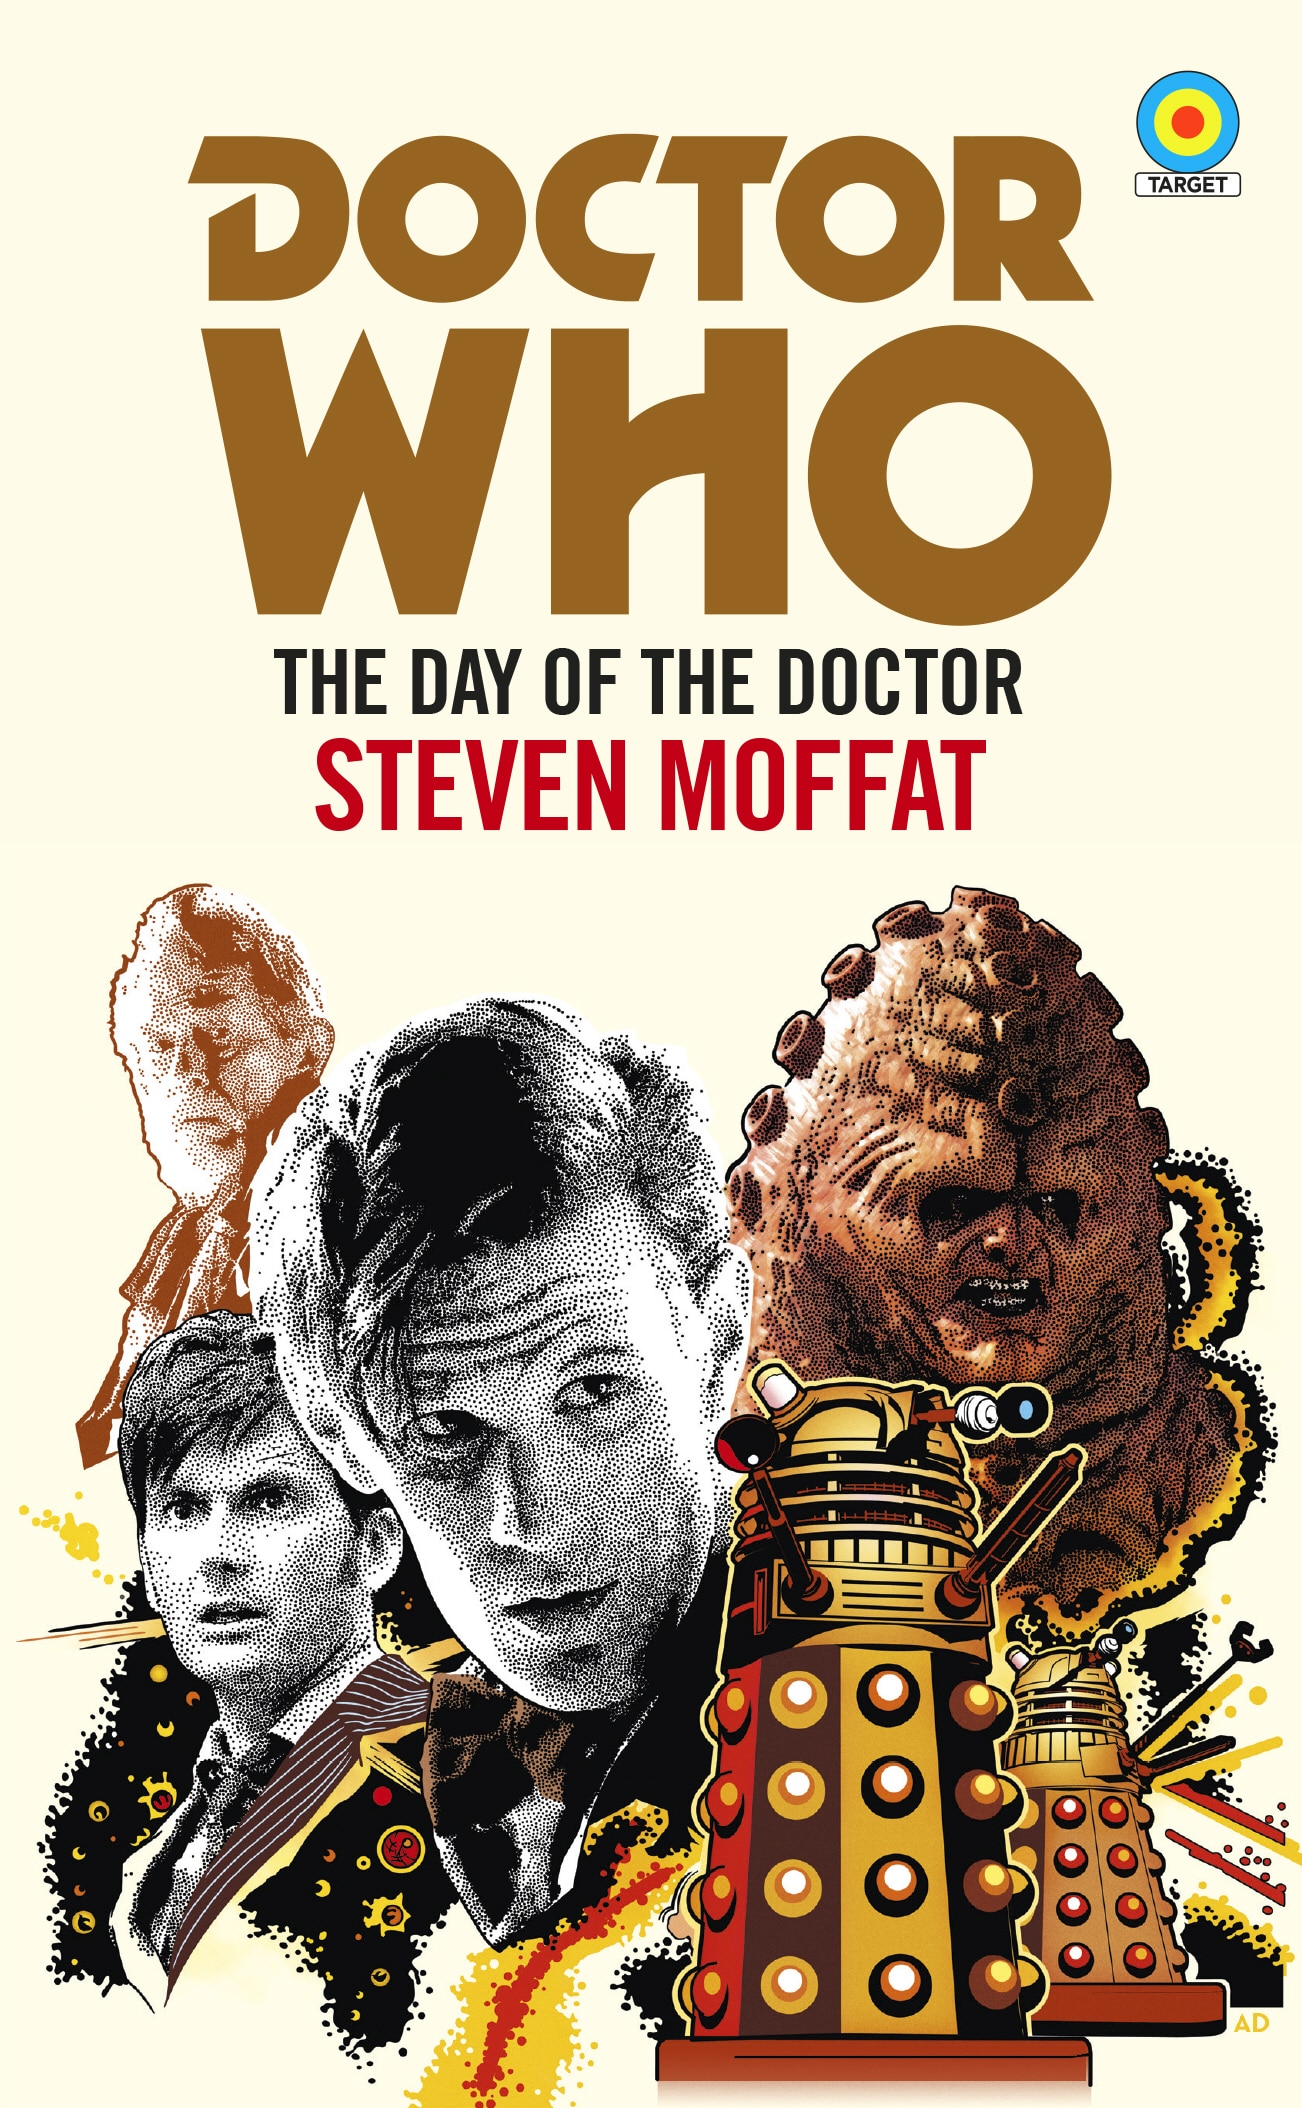 New Doctor Who 'Target' style novelisations on the way Doctor Who